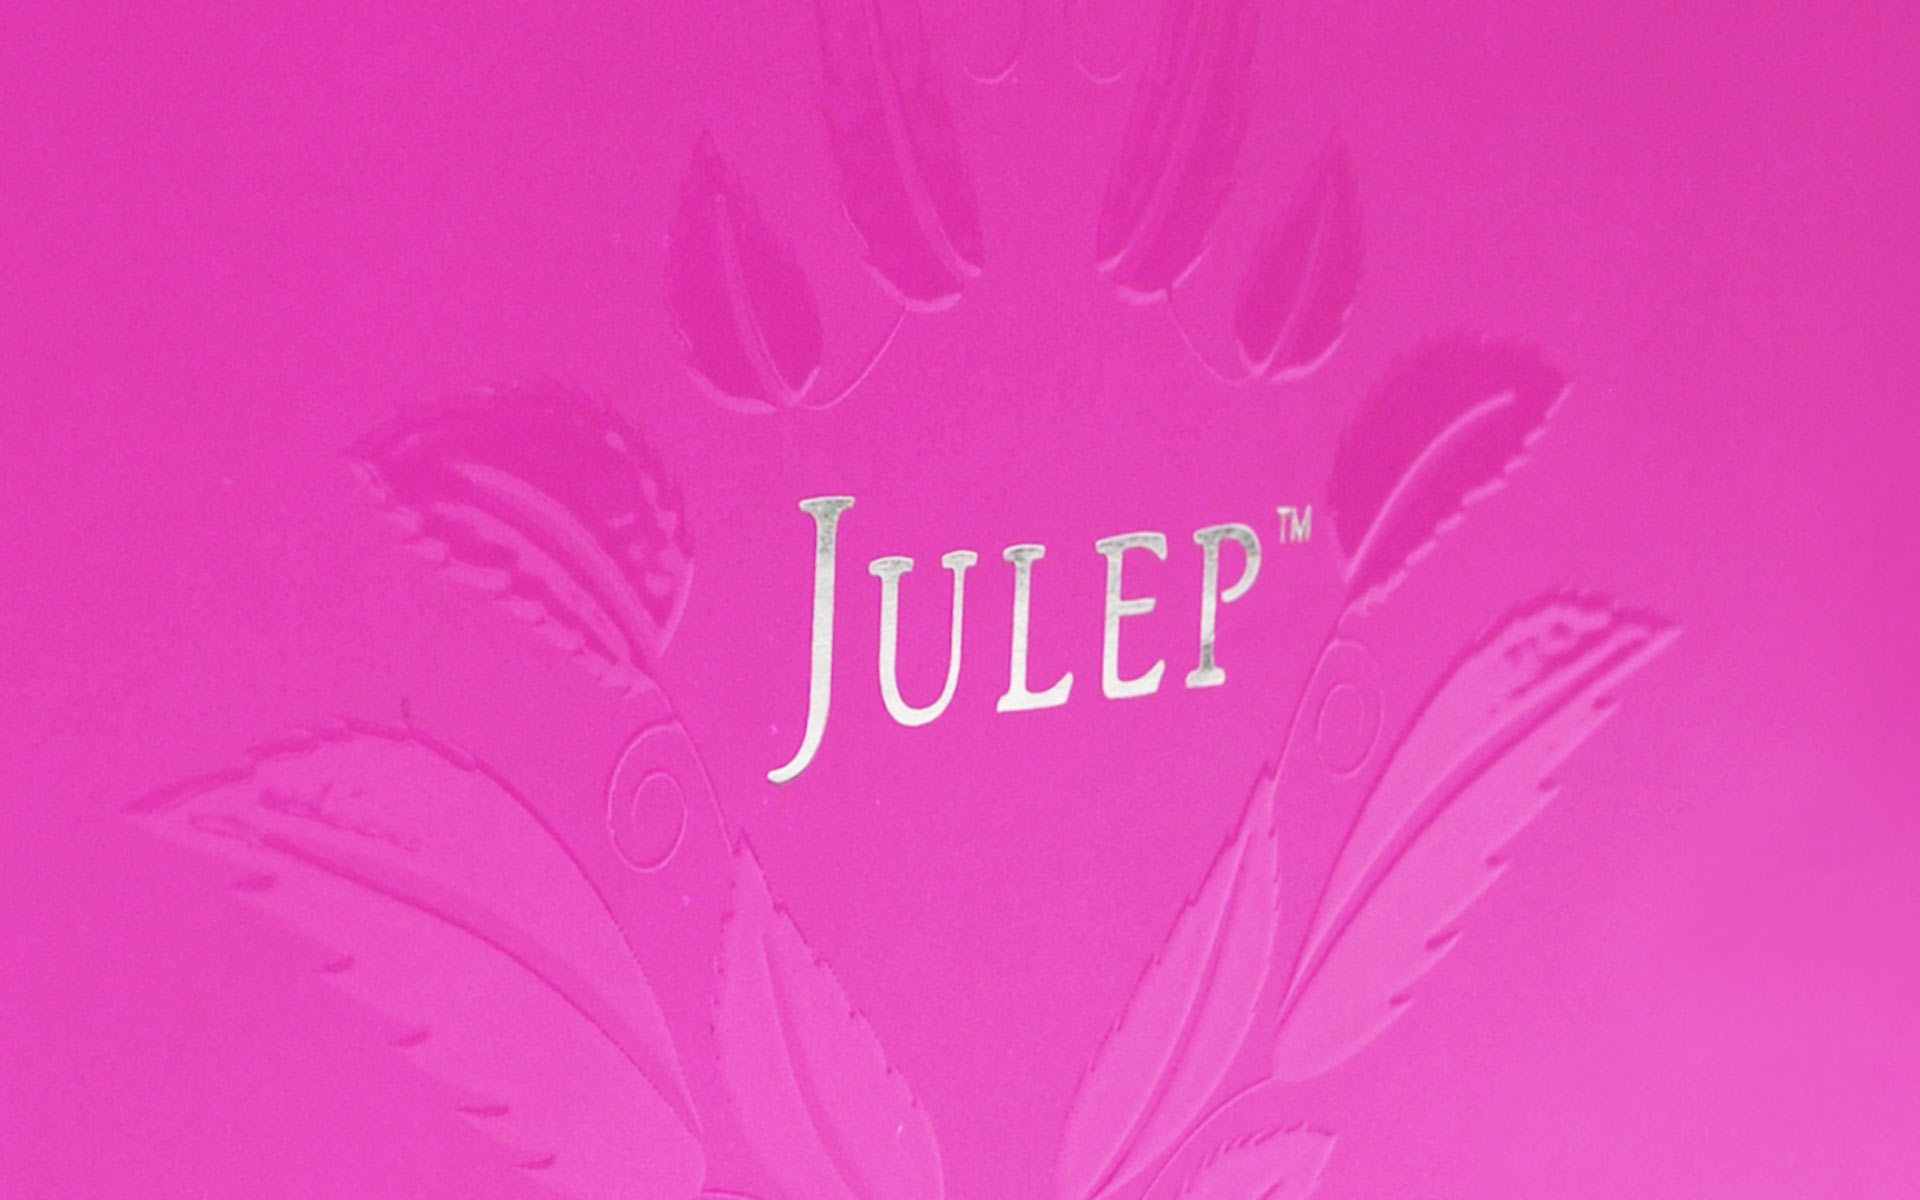 Snapshot of beauty product packaging designed for Julep by Creative Retail Packaging